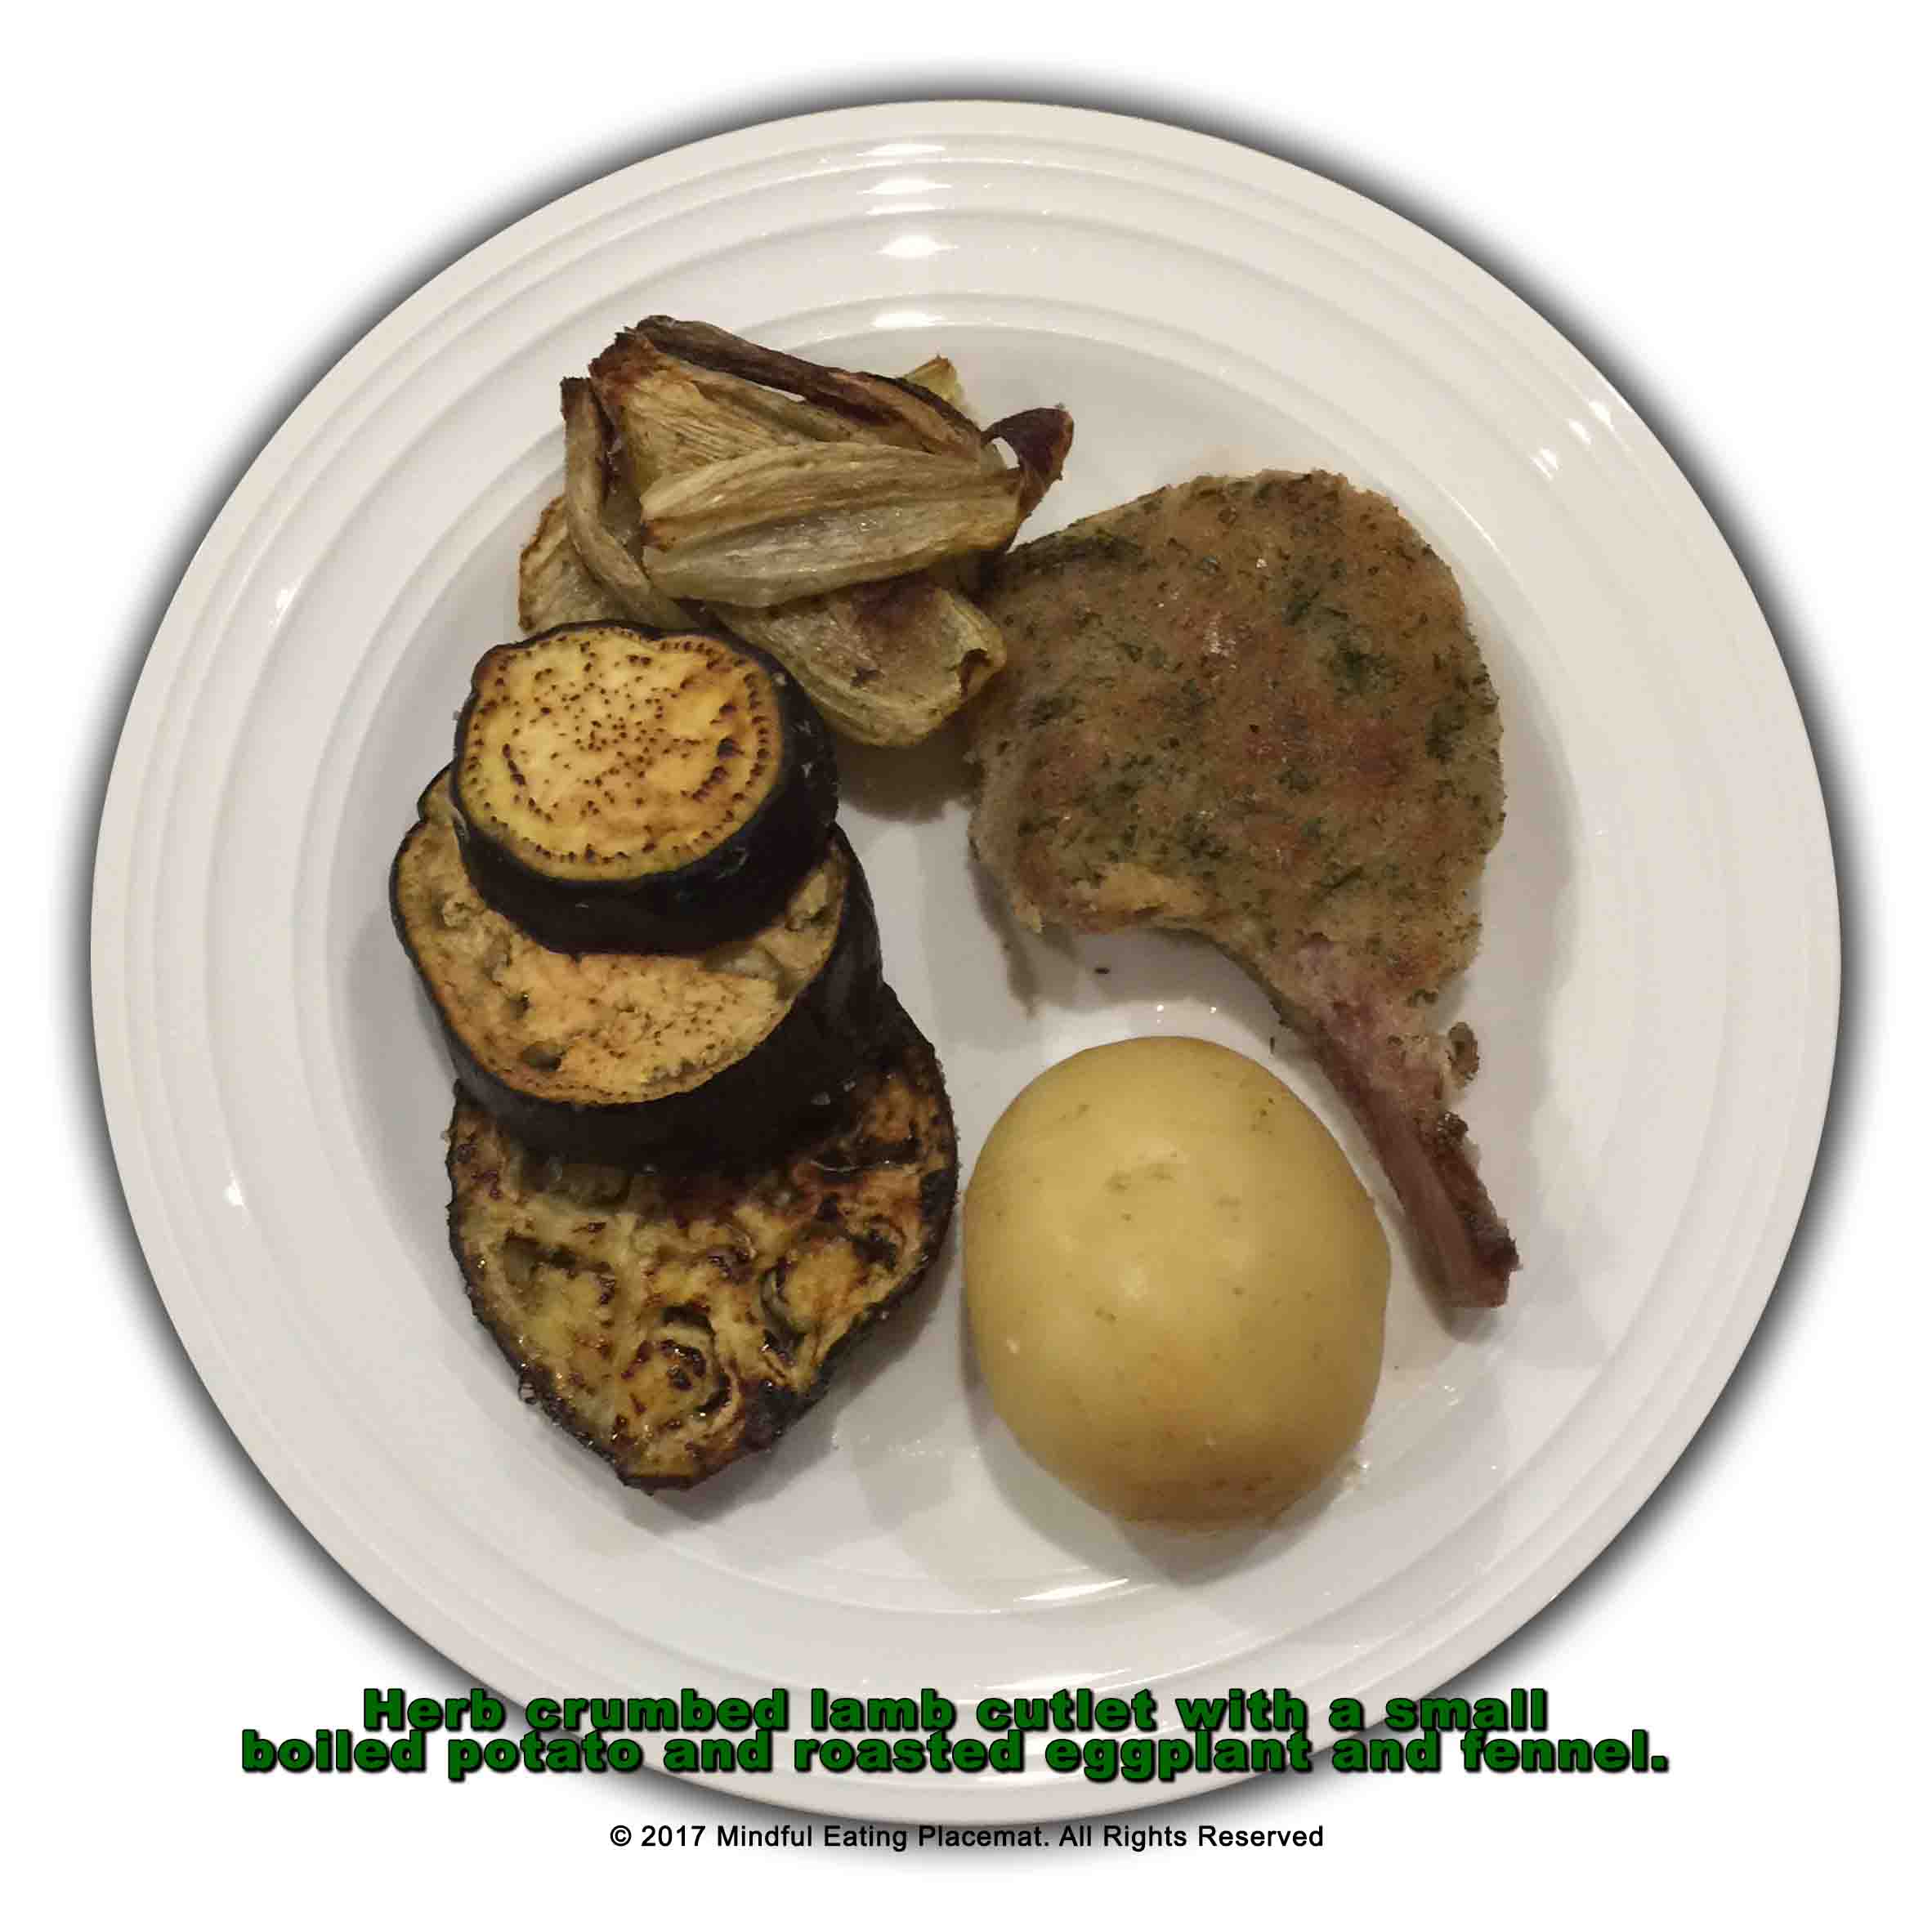 Lamb cutlet with potato, eggplant and fennel